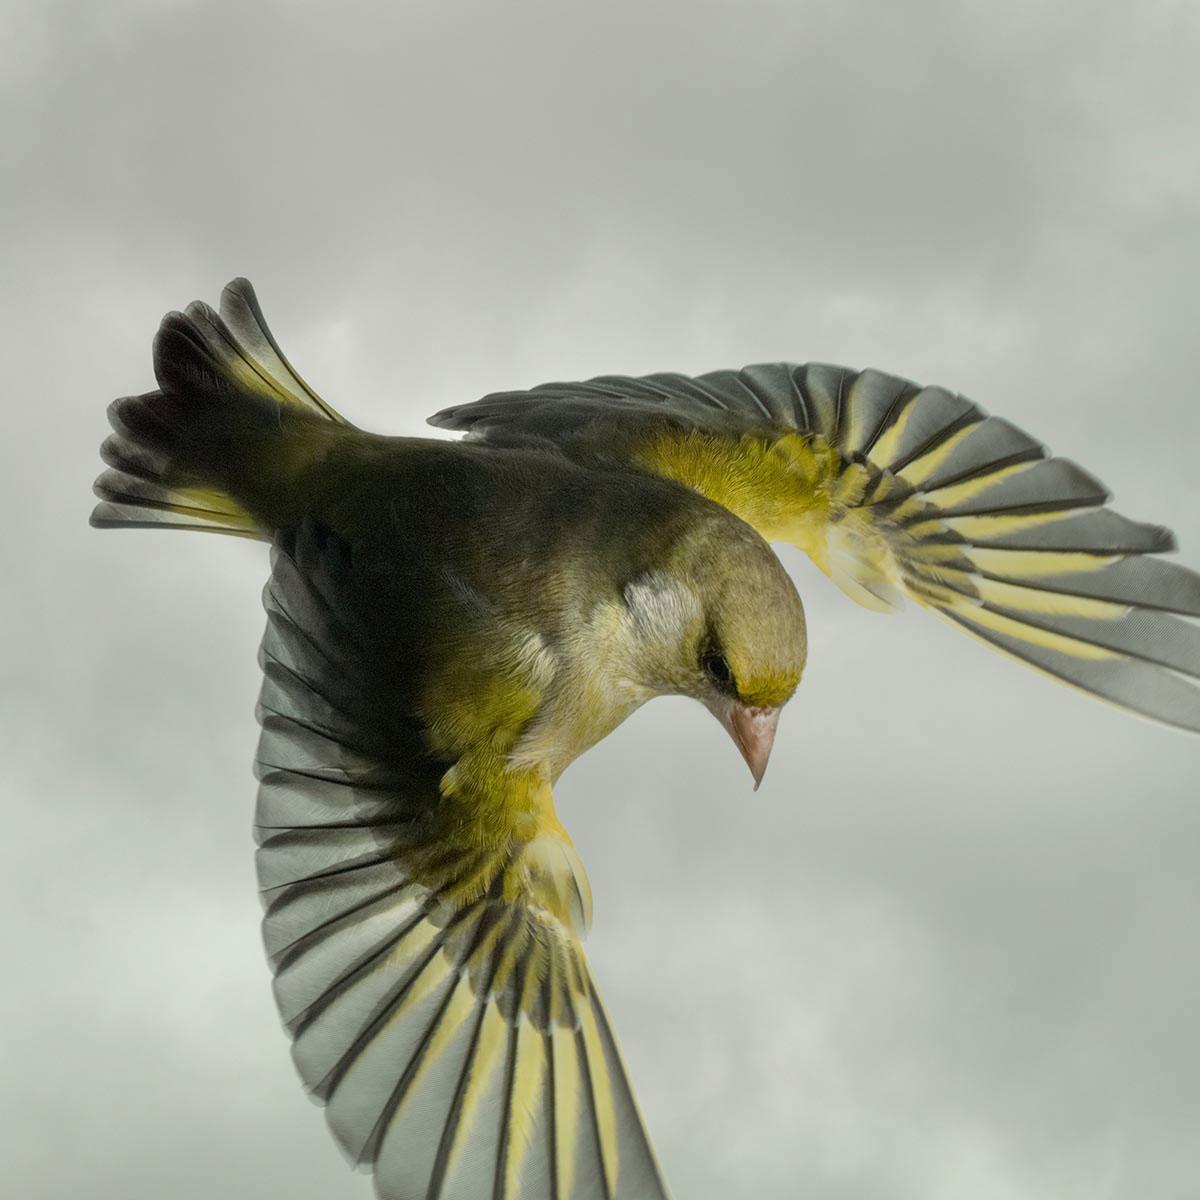 The greenfinch is an infrequent visitor to my garden, but with their glorious colours and strong, rounded shapes they are a sight to behold. The fan-like shape of the wings frames this bird with dramatic effect. 

Greenfinch is part of the In Flight